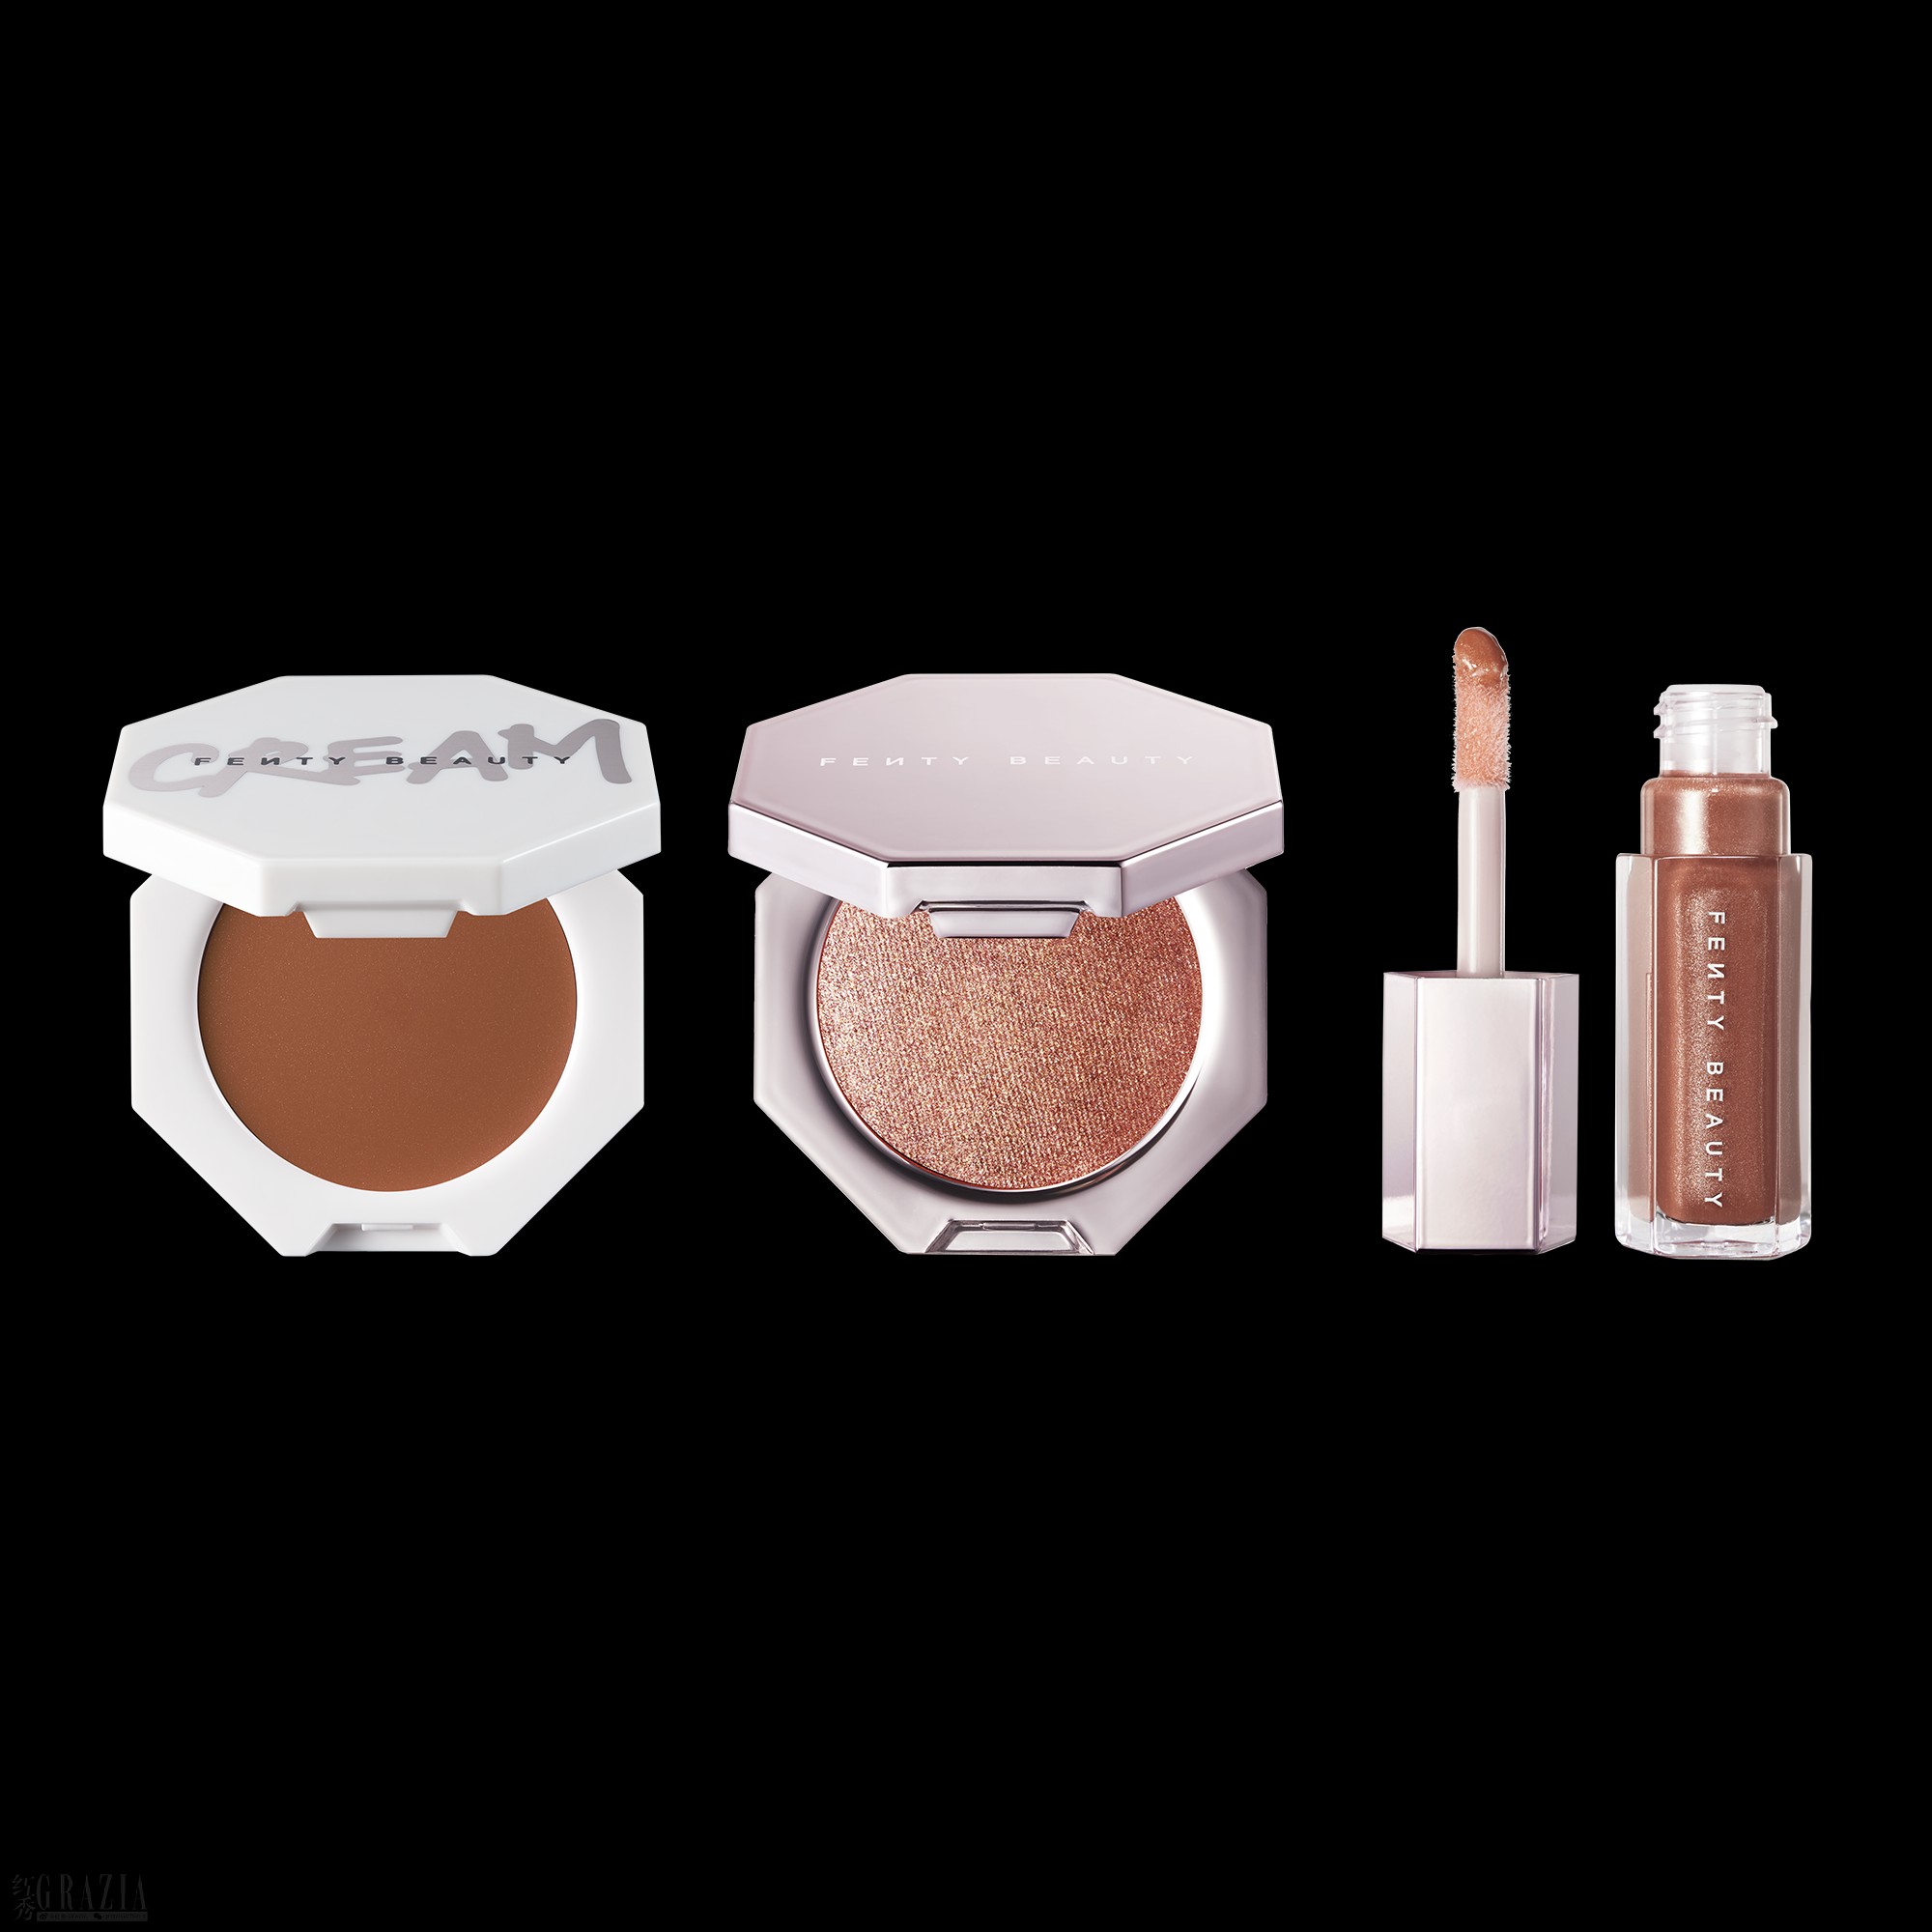 FB_HOL20_T2PRODUCT_SILO_FENTY_GLOW_TRIO_COMPACT_OPEN_2000x2000.png